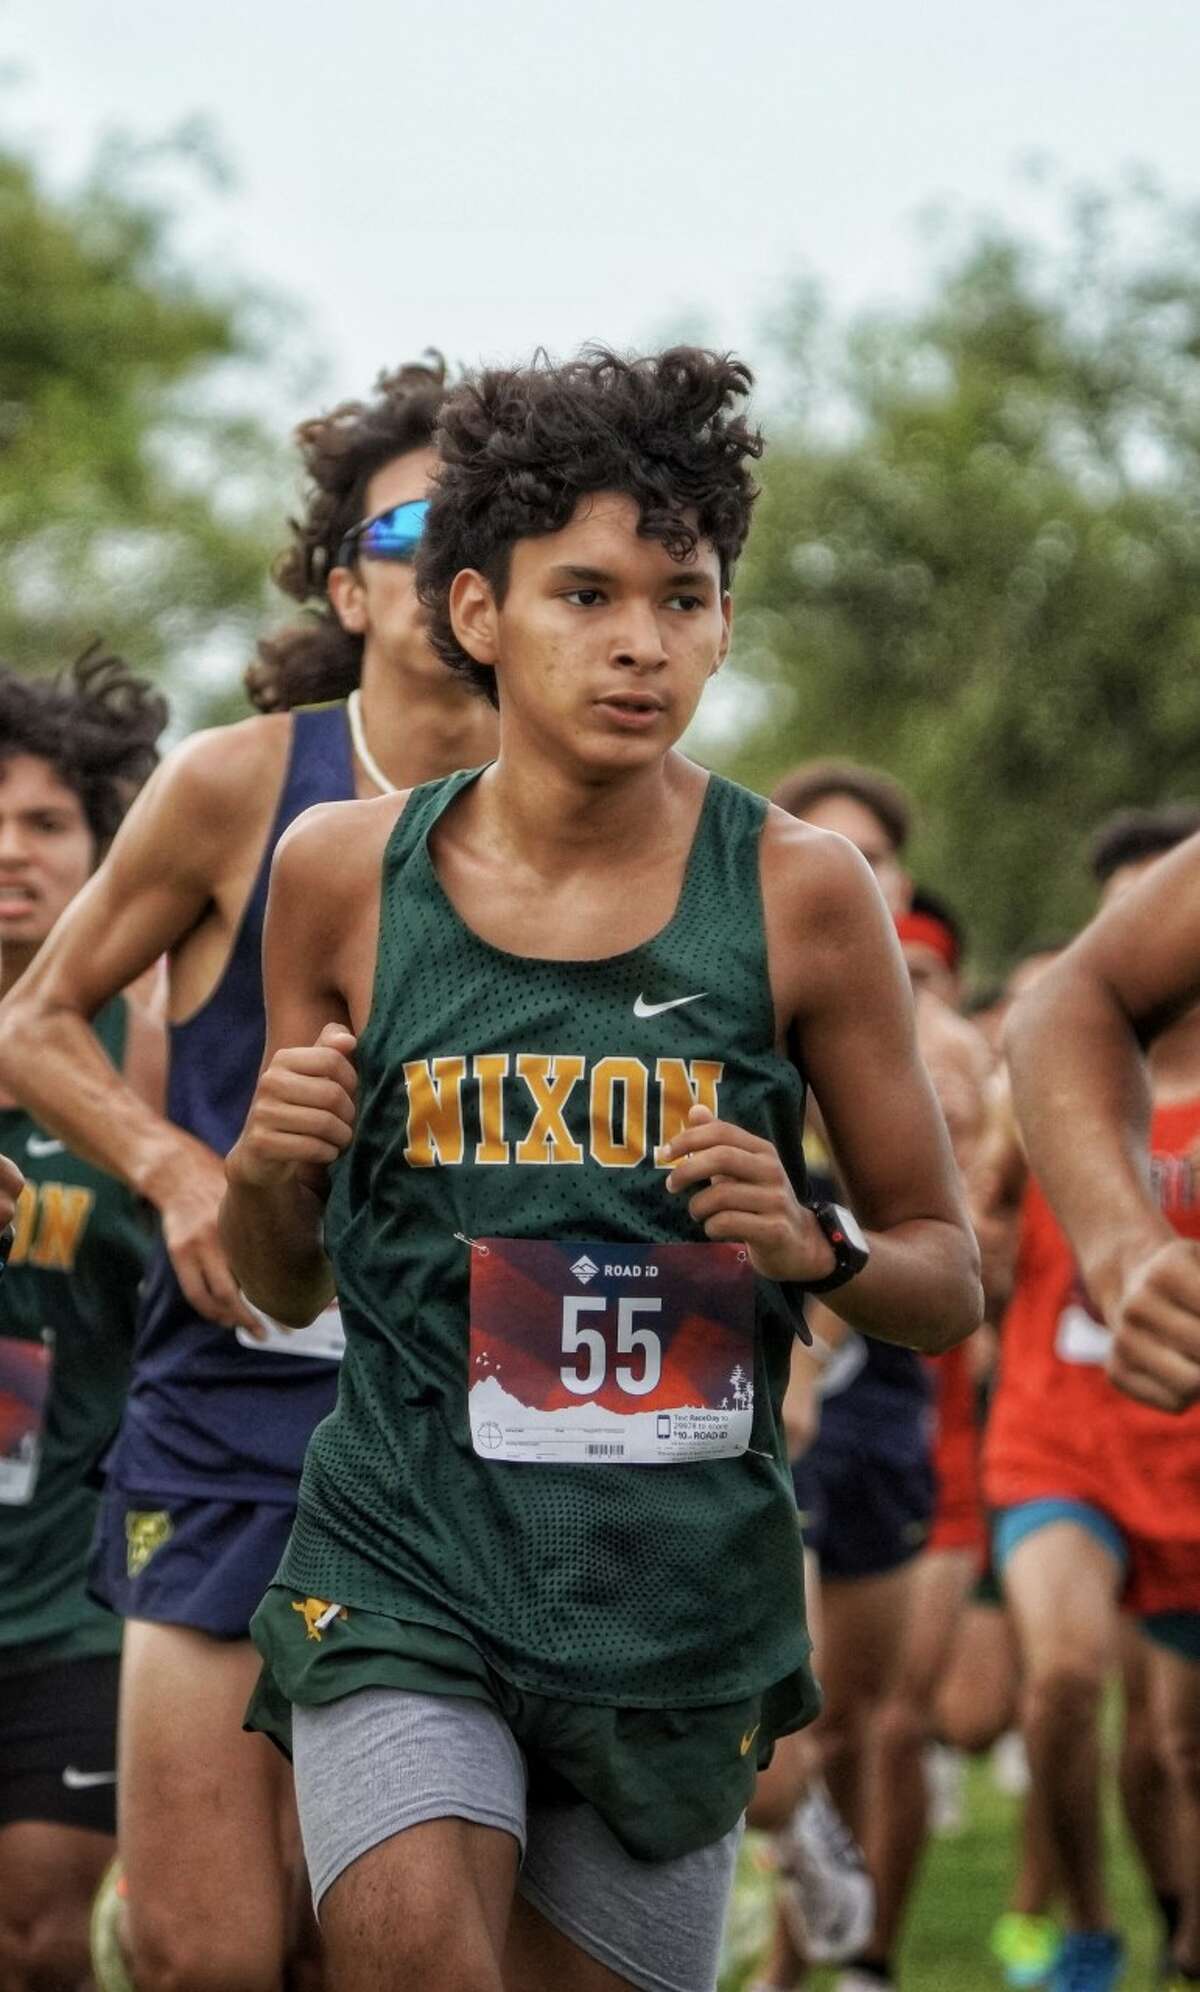 Nixon freshman Israel Esparza was named this year's Newcomer of the Year.